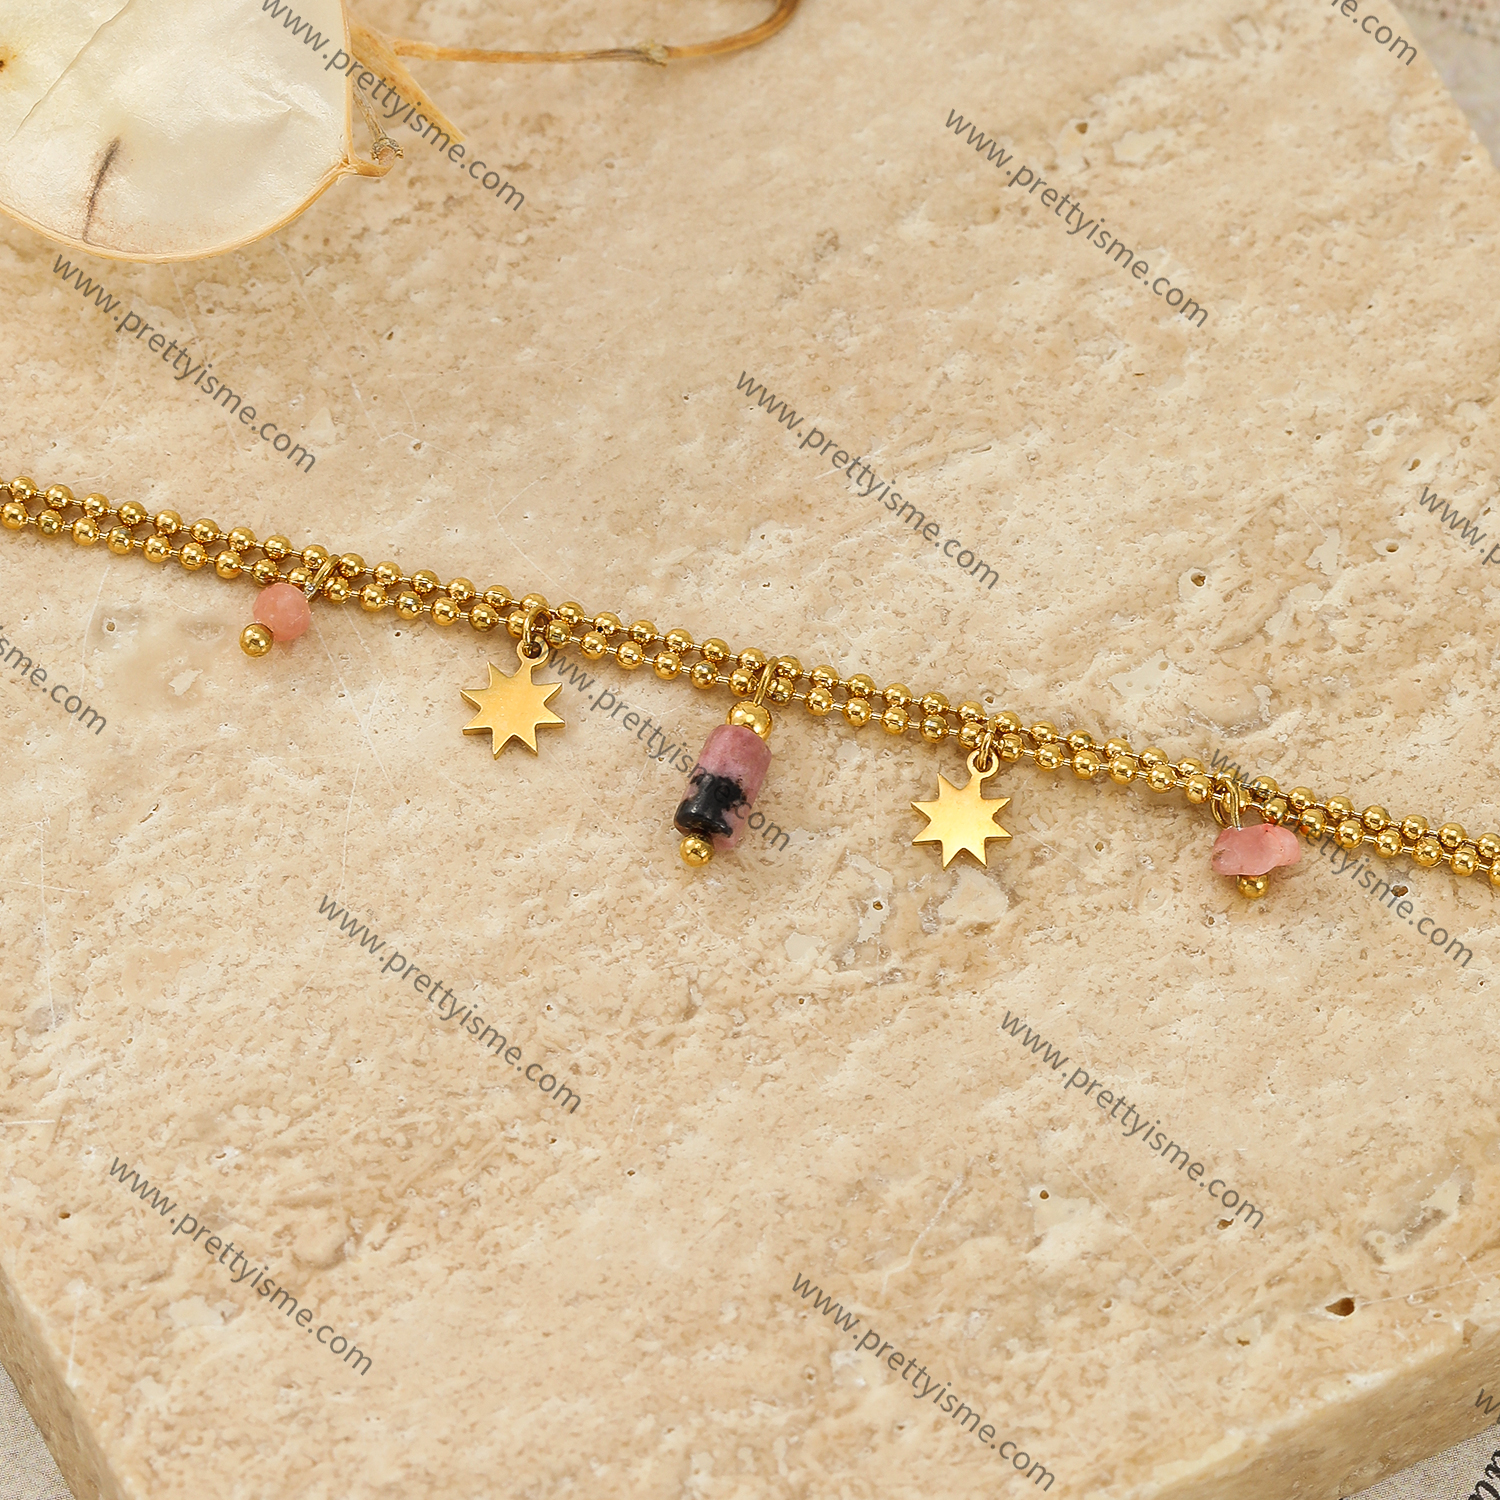 Double Bracelet with Stainless Steel Small Gold Beads and Pink Stones.webp